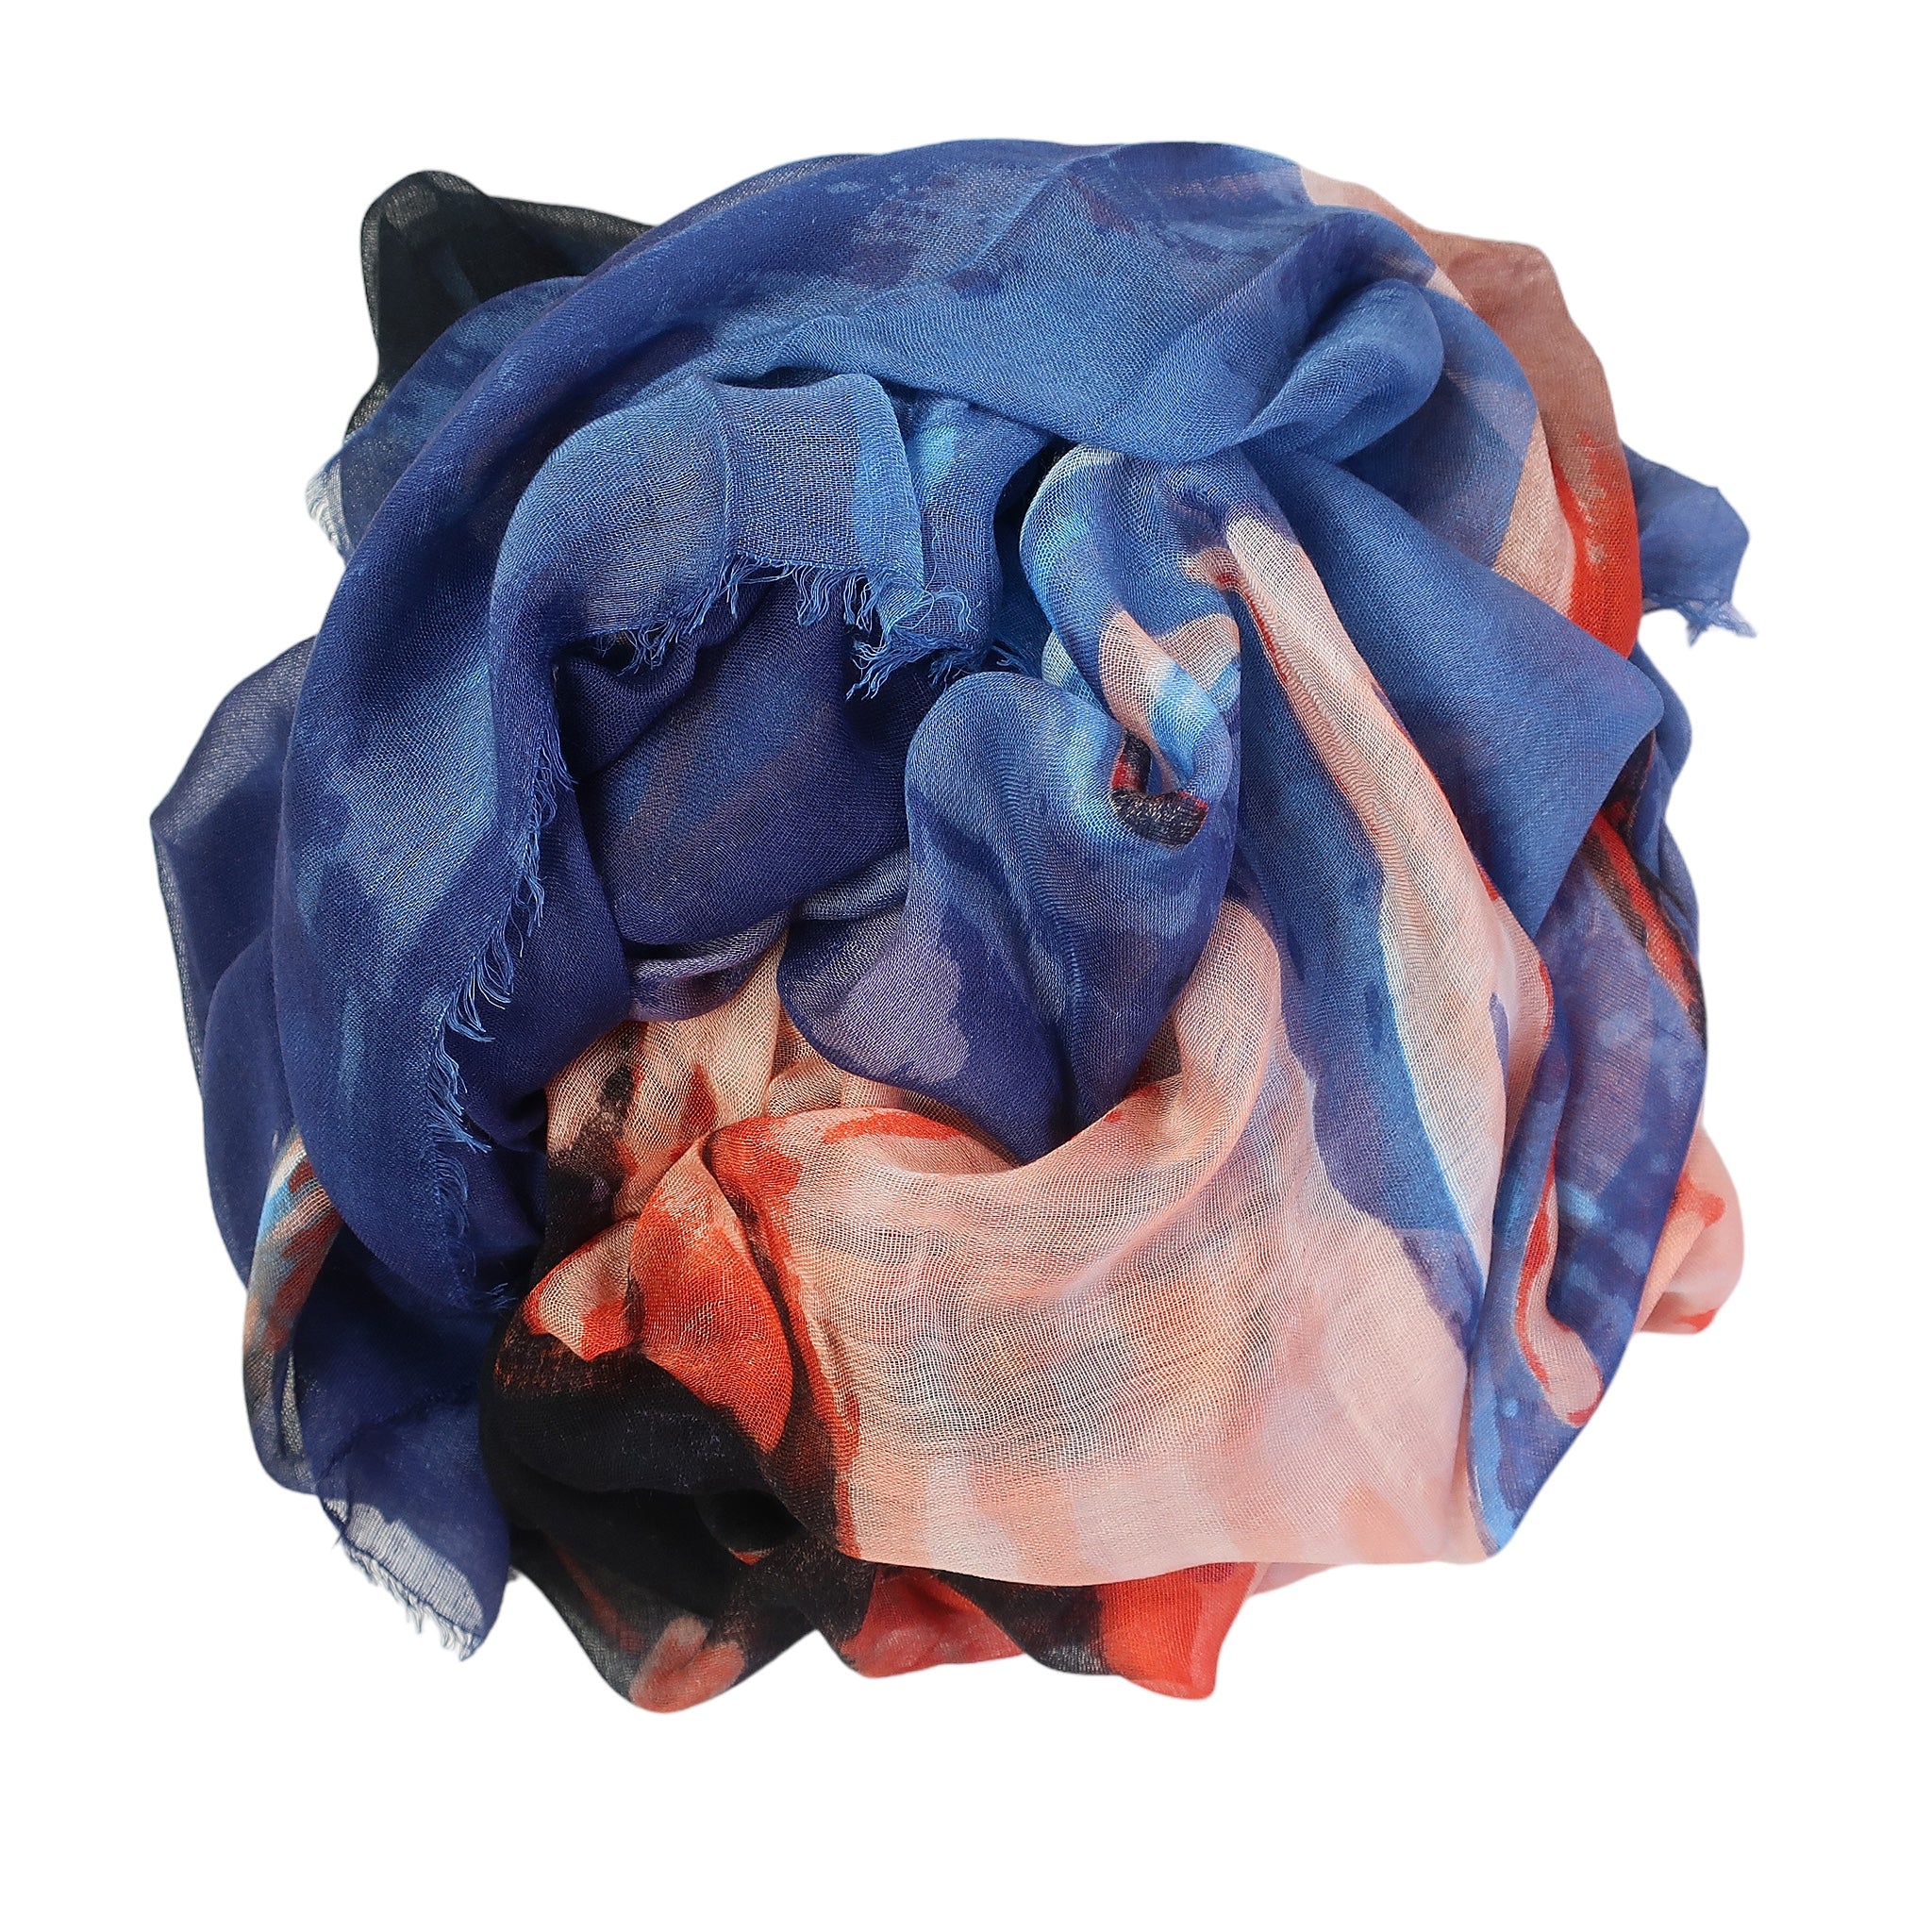 Blue Pacific Cashmere and Silk Mermaid Kiss Tapestry Scarf in Denim Blue